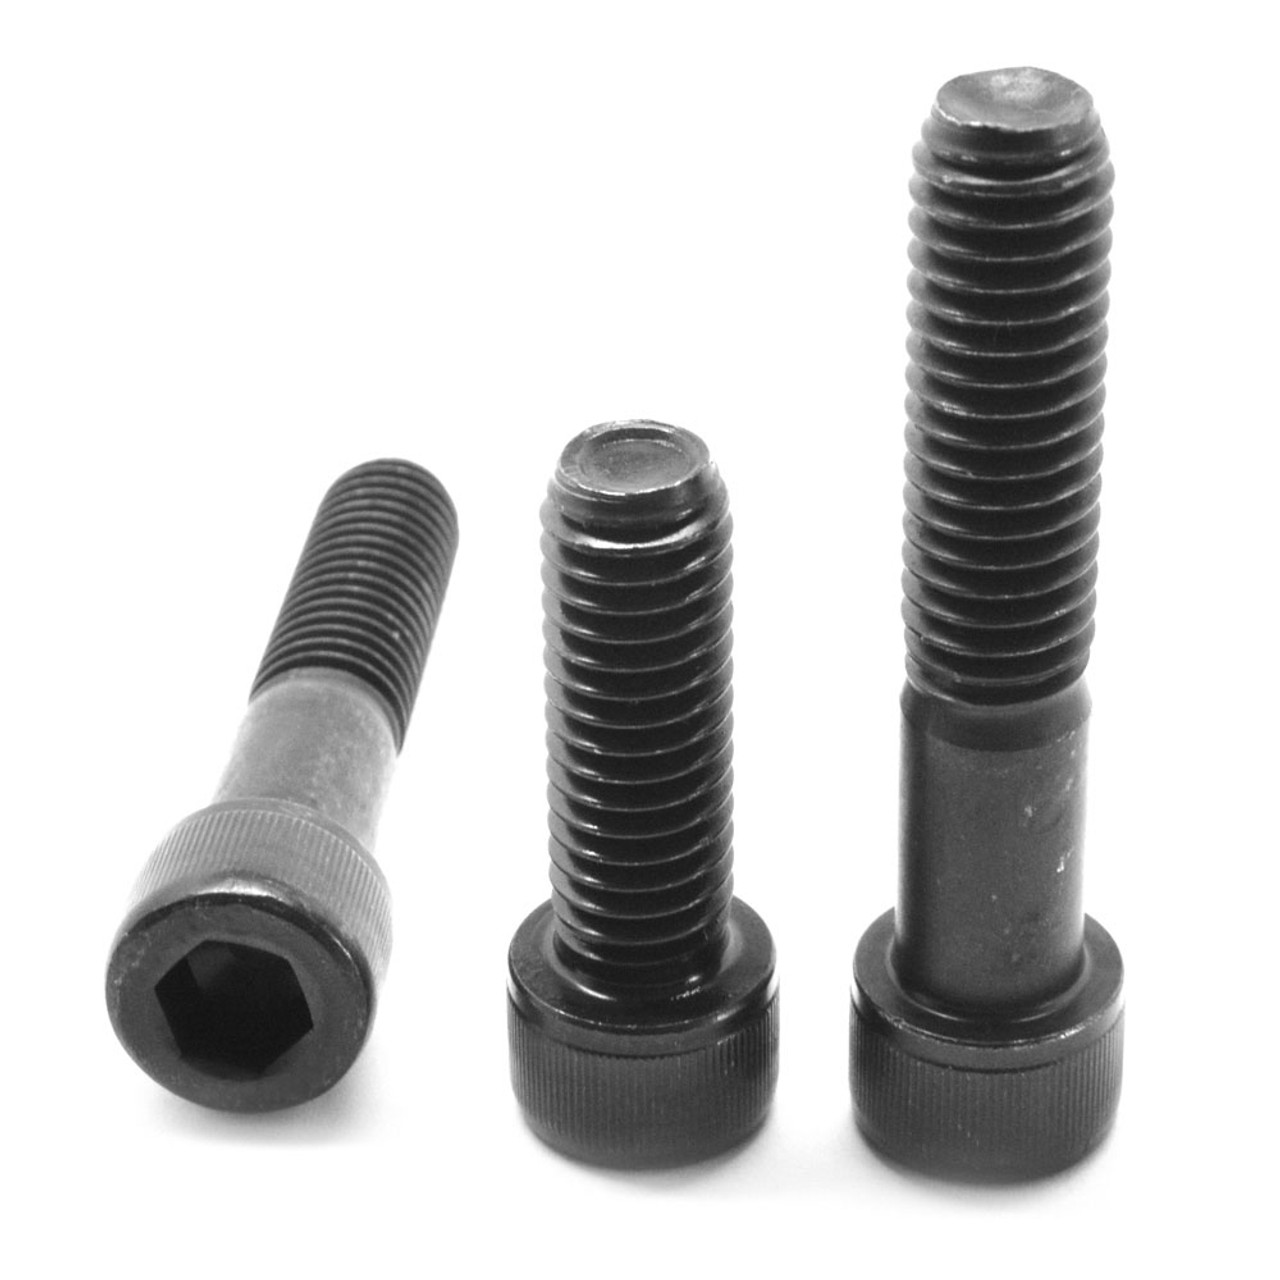 Pack of 25 M16-2 Thread Size Small Parts M16035CSFL Hex Socket Drive US Made Black Oxide Alloy Steel Flat Screw Fully Threaded 35 mm Length 